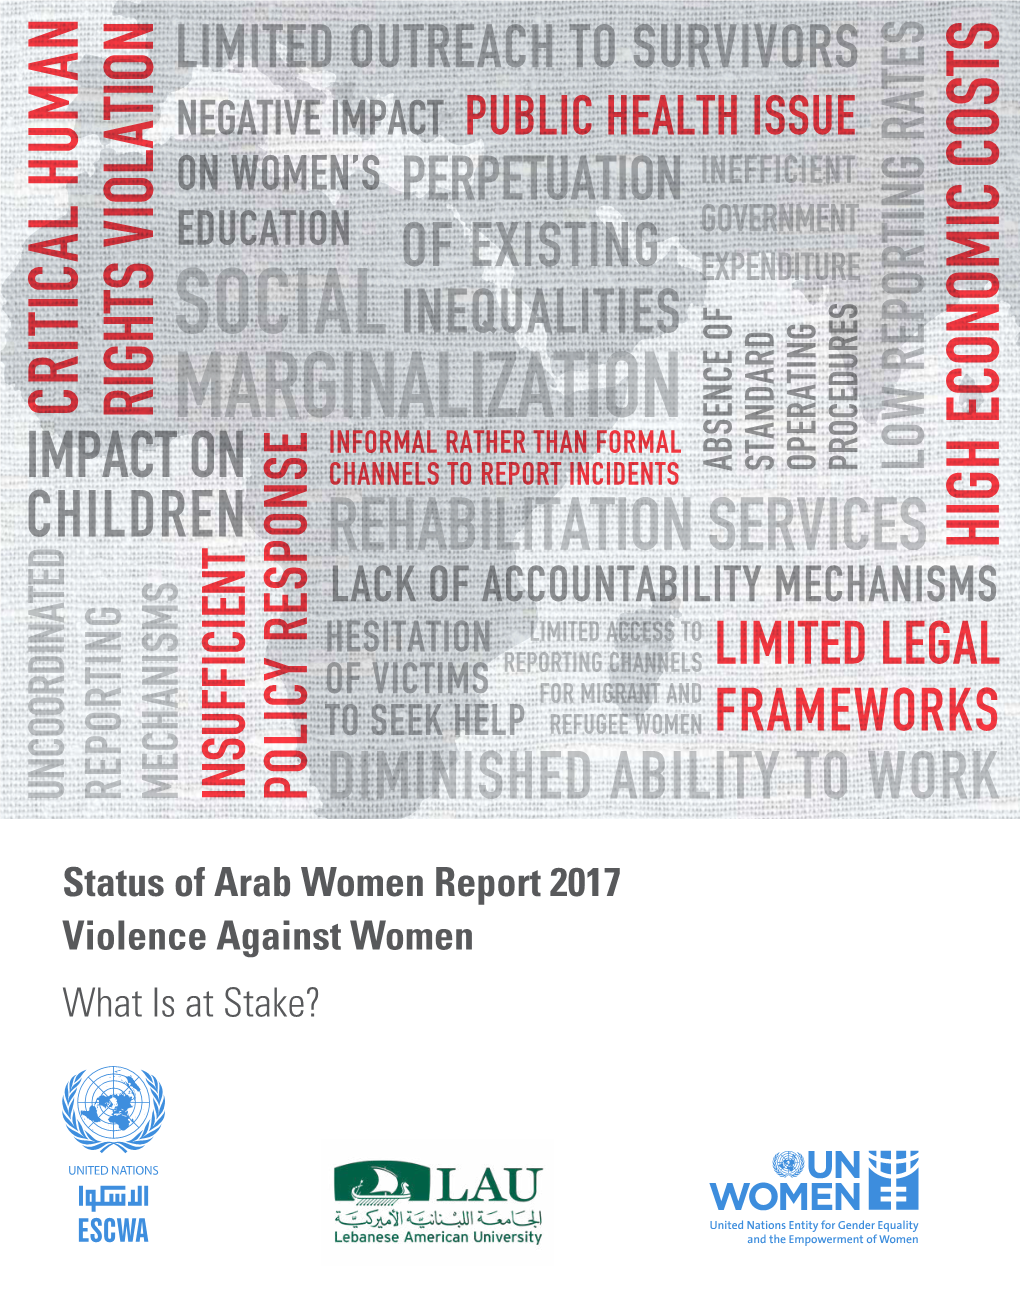 Status of Arab Women Report 2017 Violence Against Women: What Is at Stake?